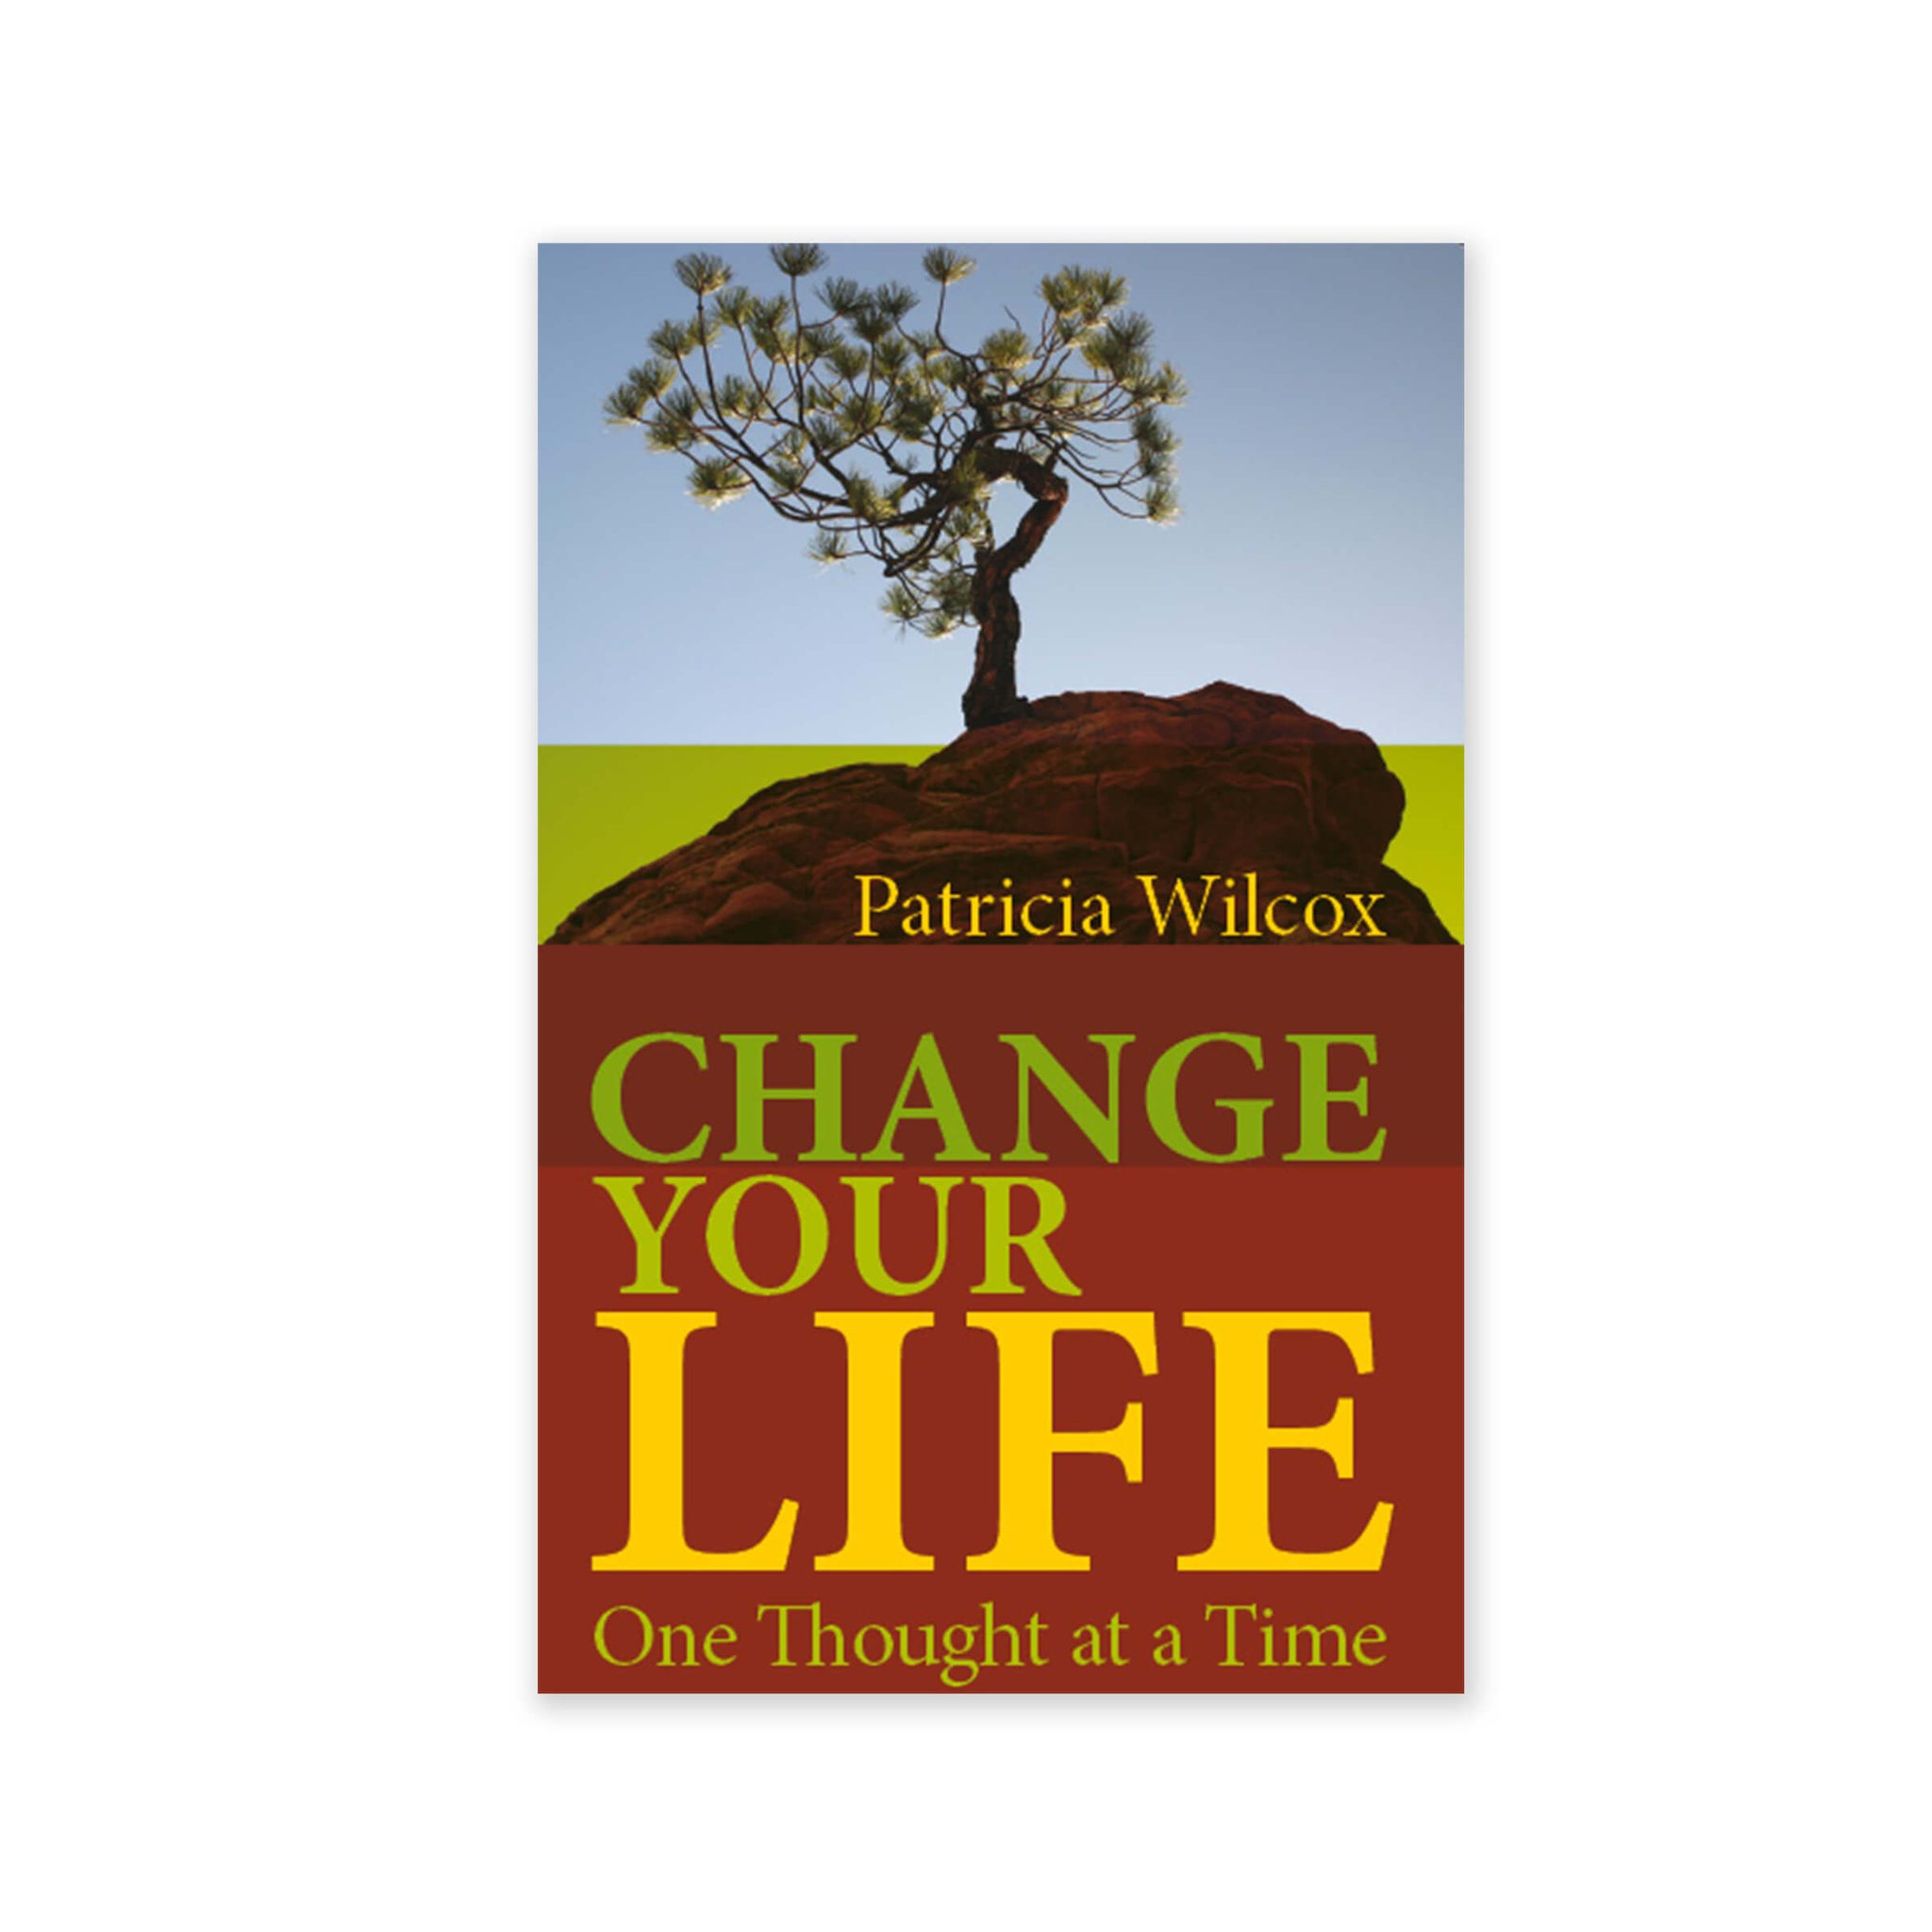 Change Your Life - One Thought at a Time